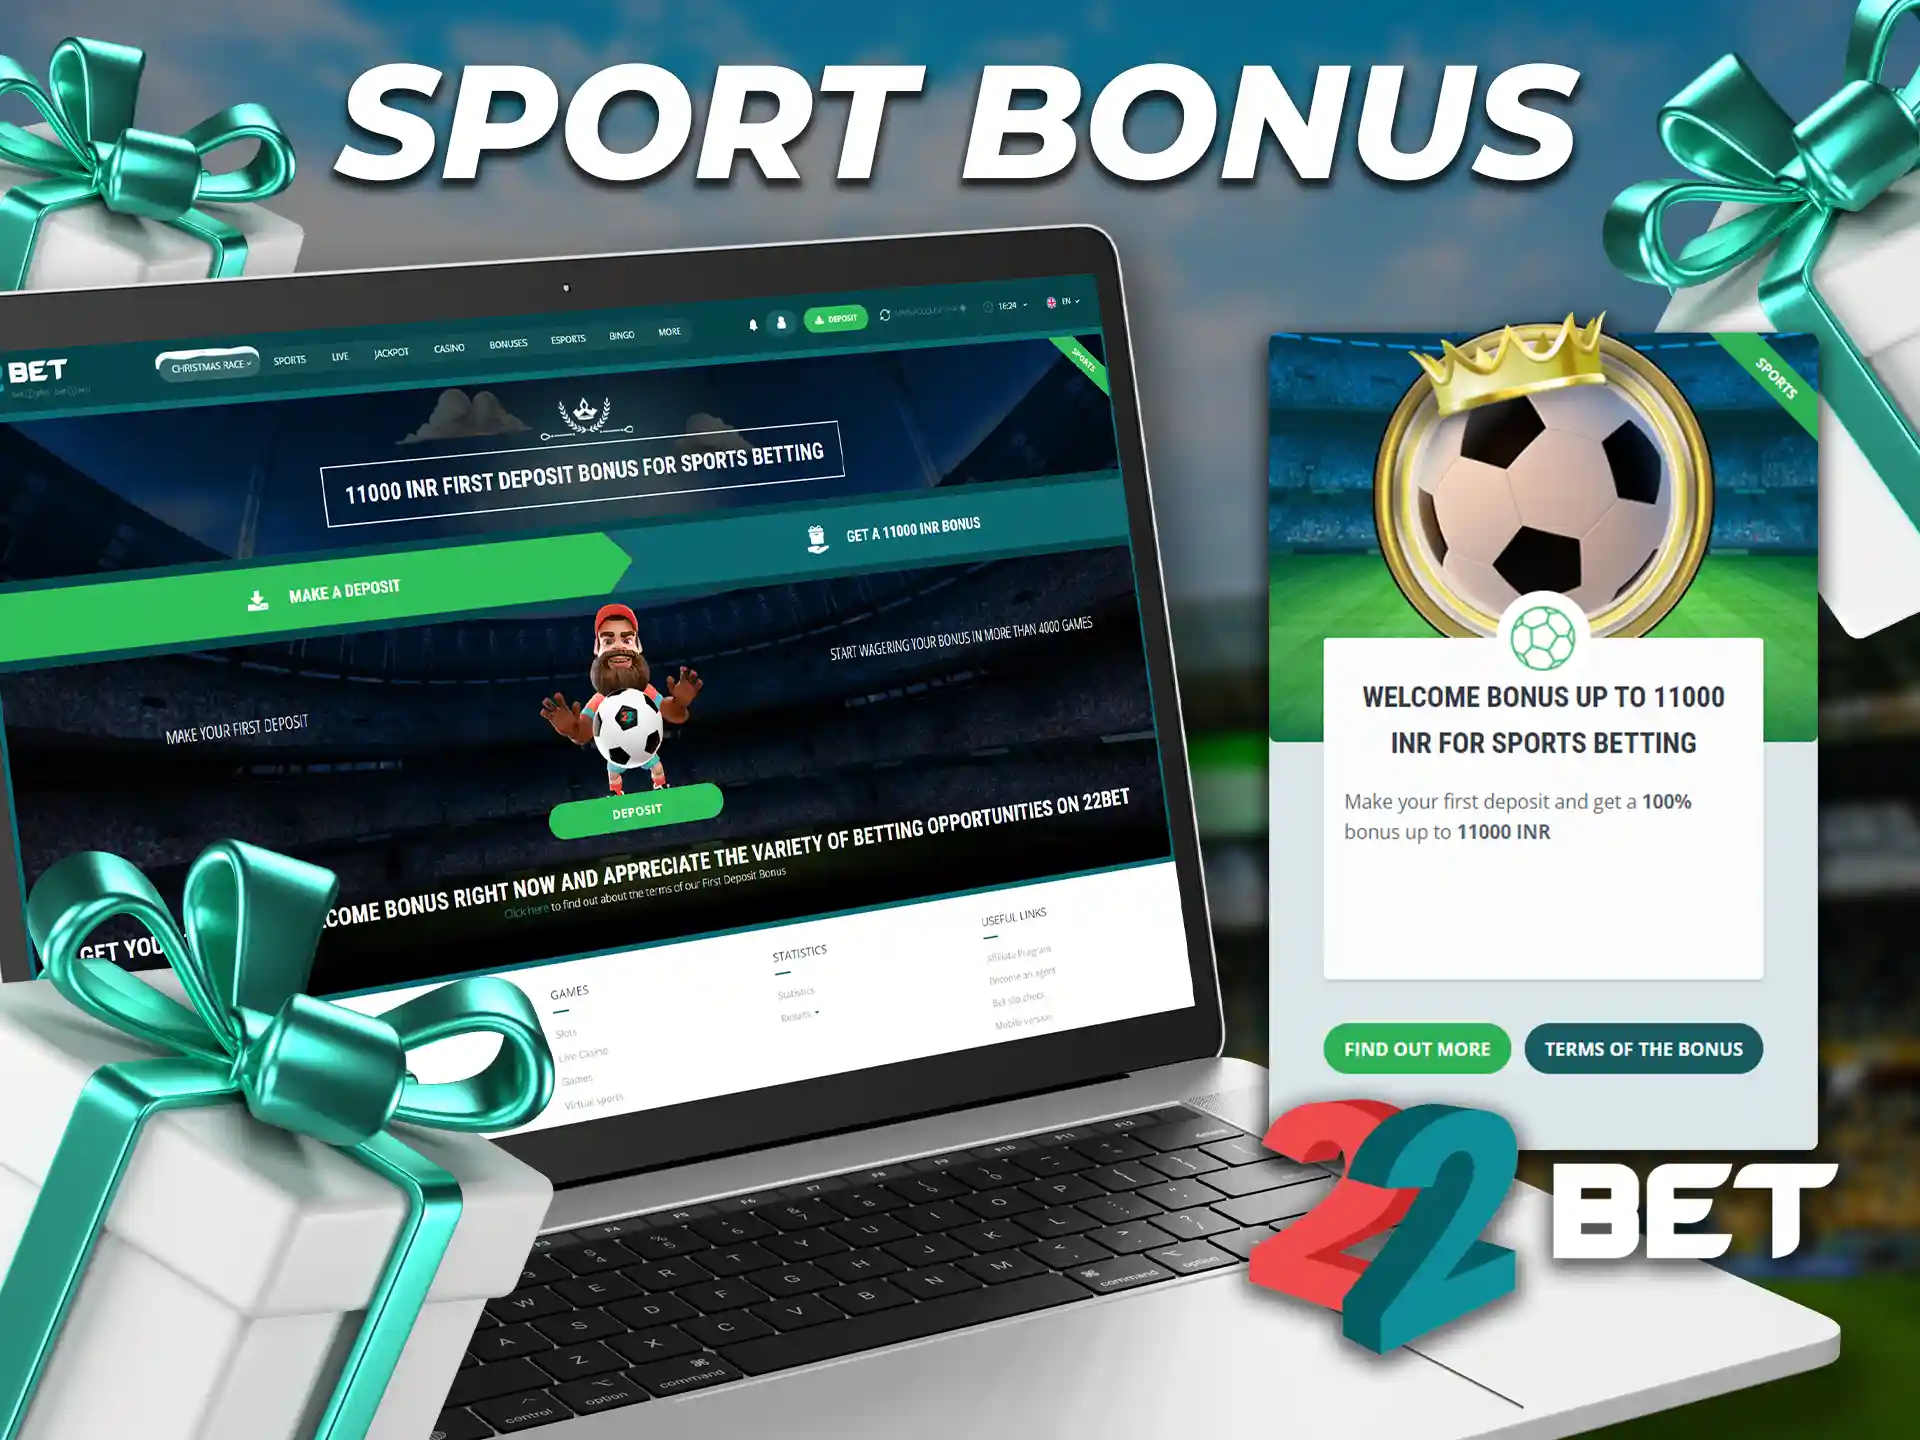 22Bet offers an opportunity for every new player to activate a welcome bonus of 100% up to Rs 11000.